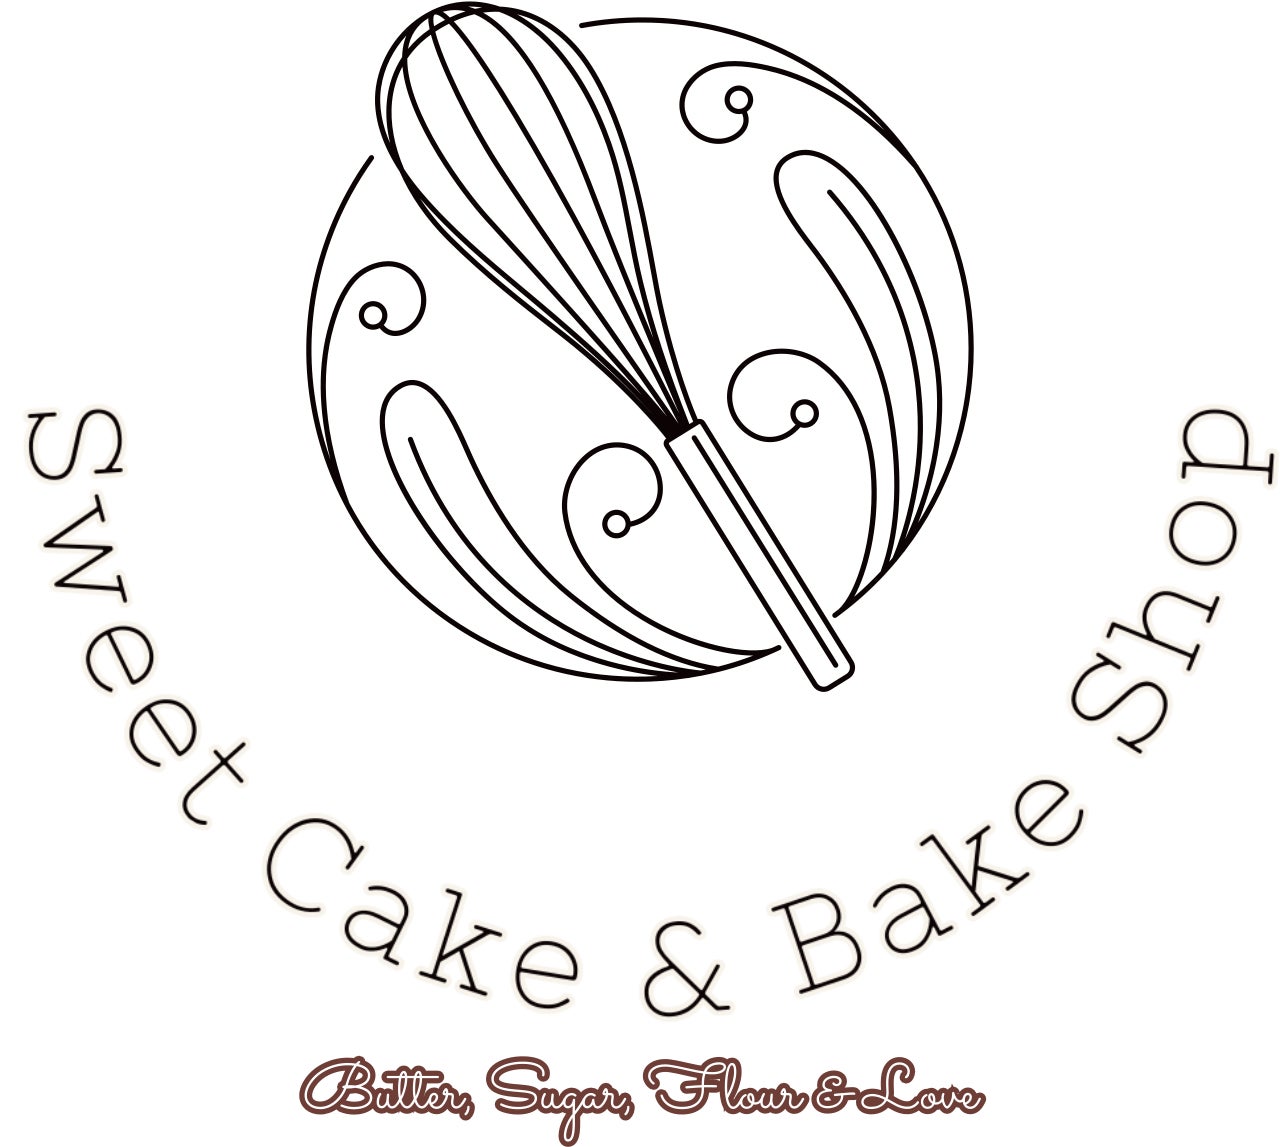 3 Best Cakes in Calgary, AB - ThreeBestRated